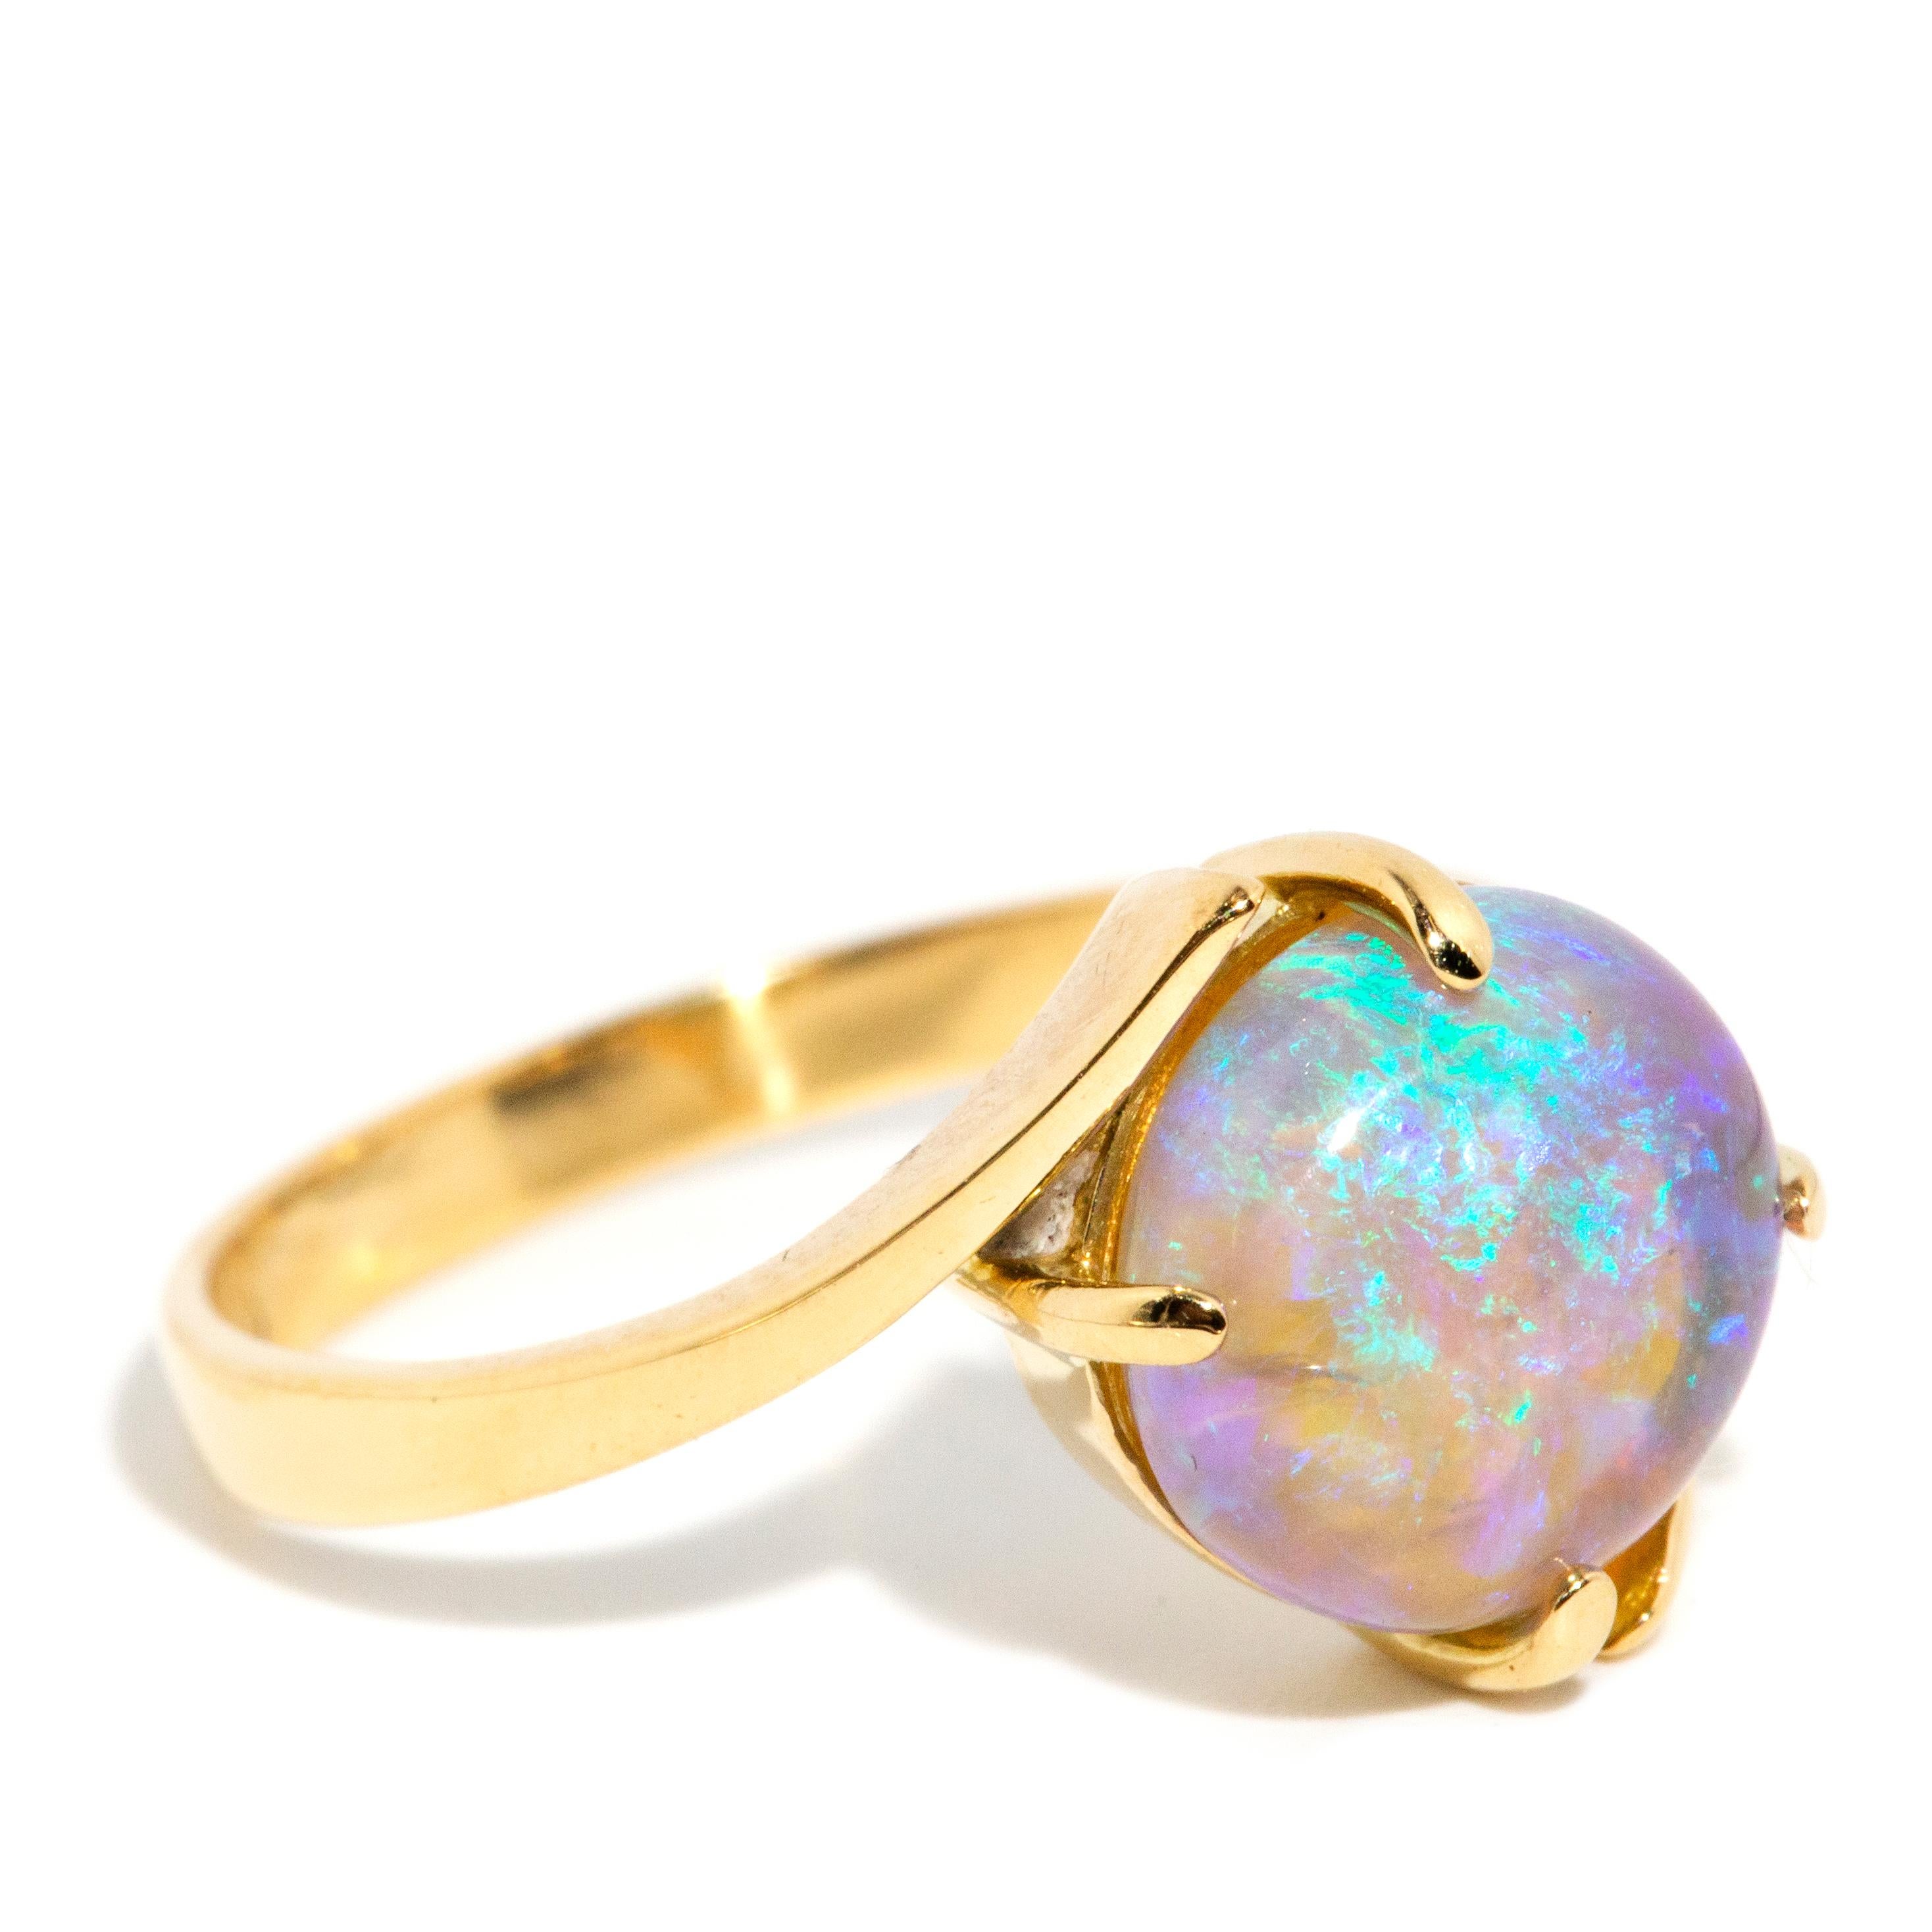 Vintage Circa 1980s Solid Australian Crystal Opal Ring 18 Carat Yellow Gold In Good Condition For Sale In Hamilton, AU